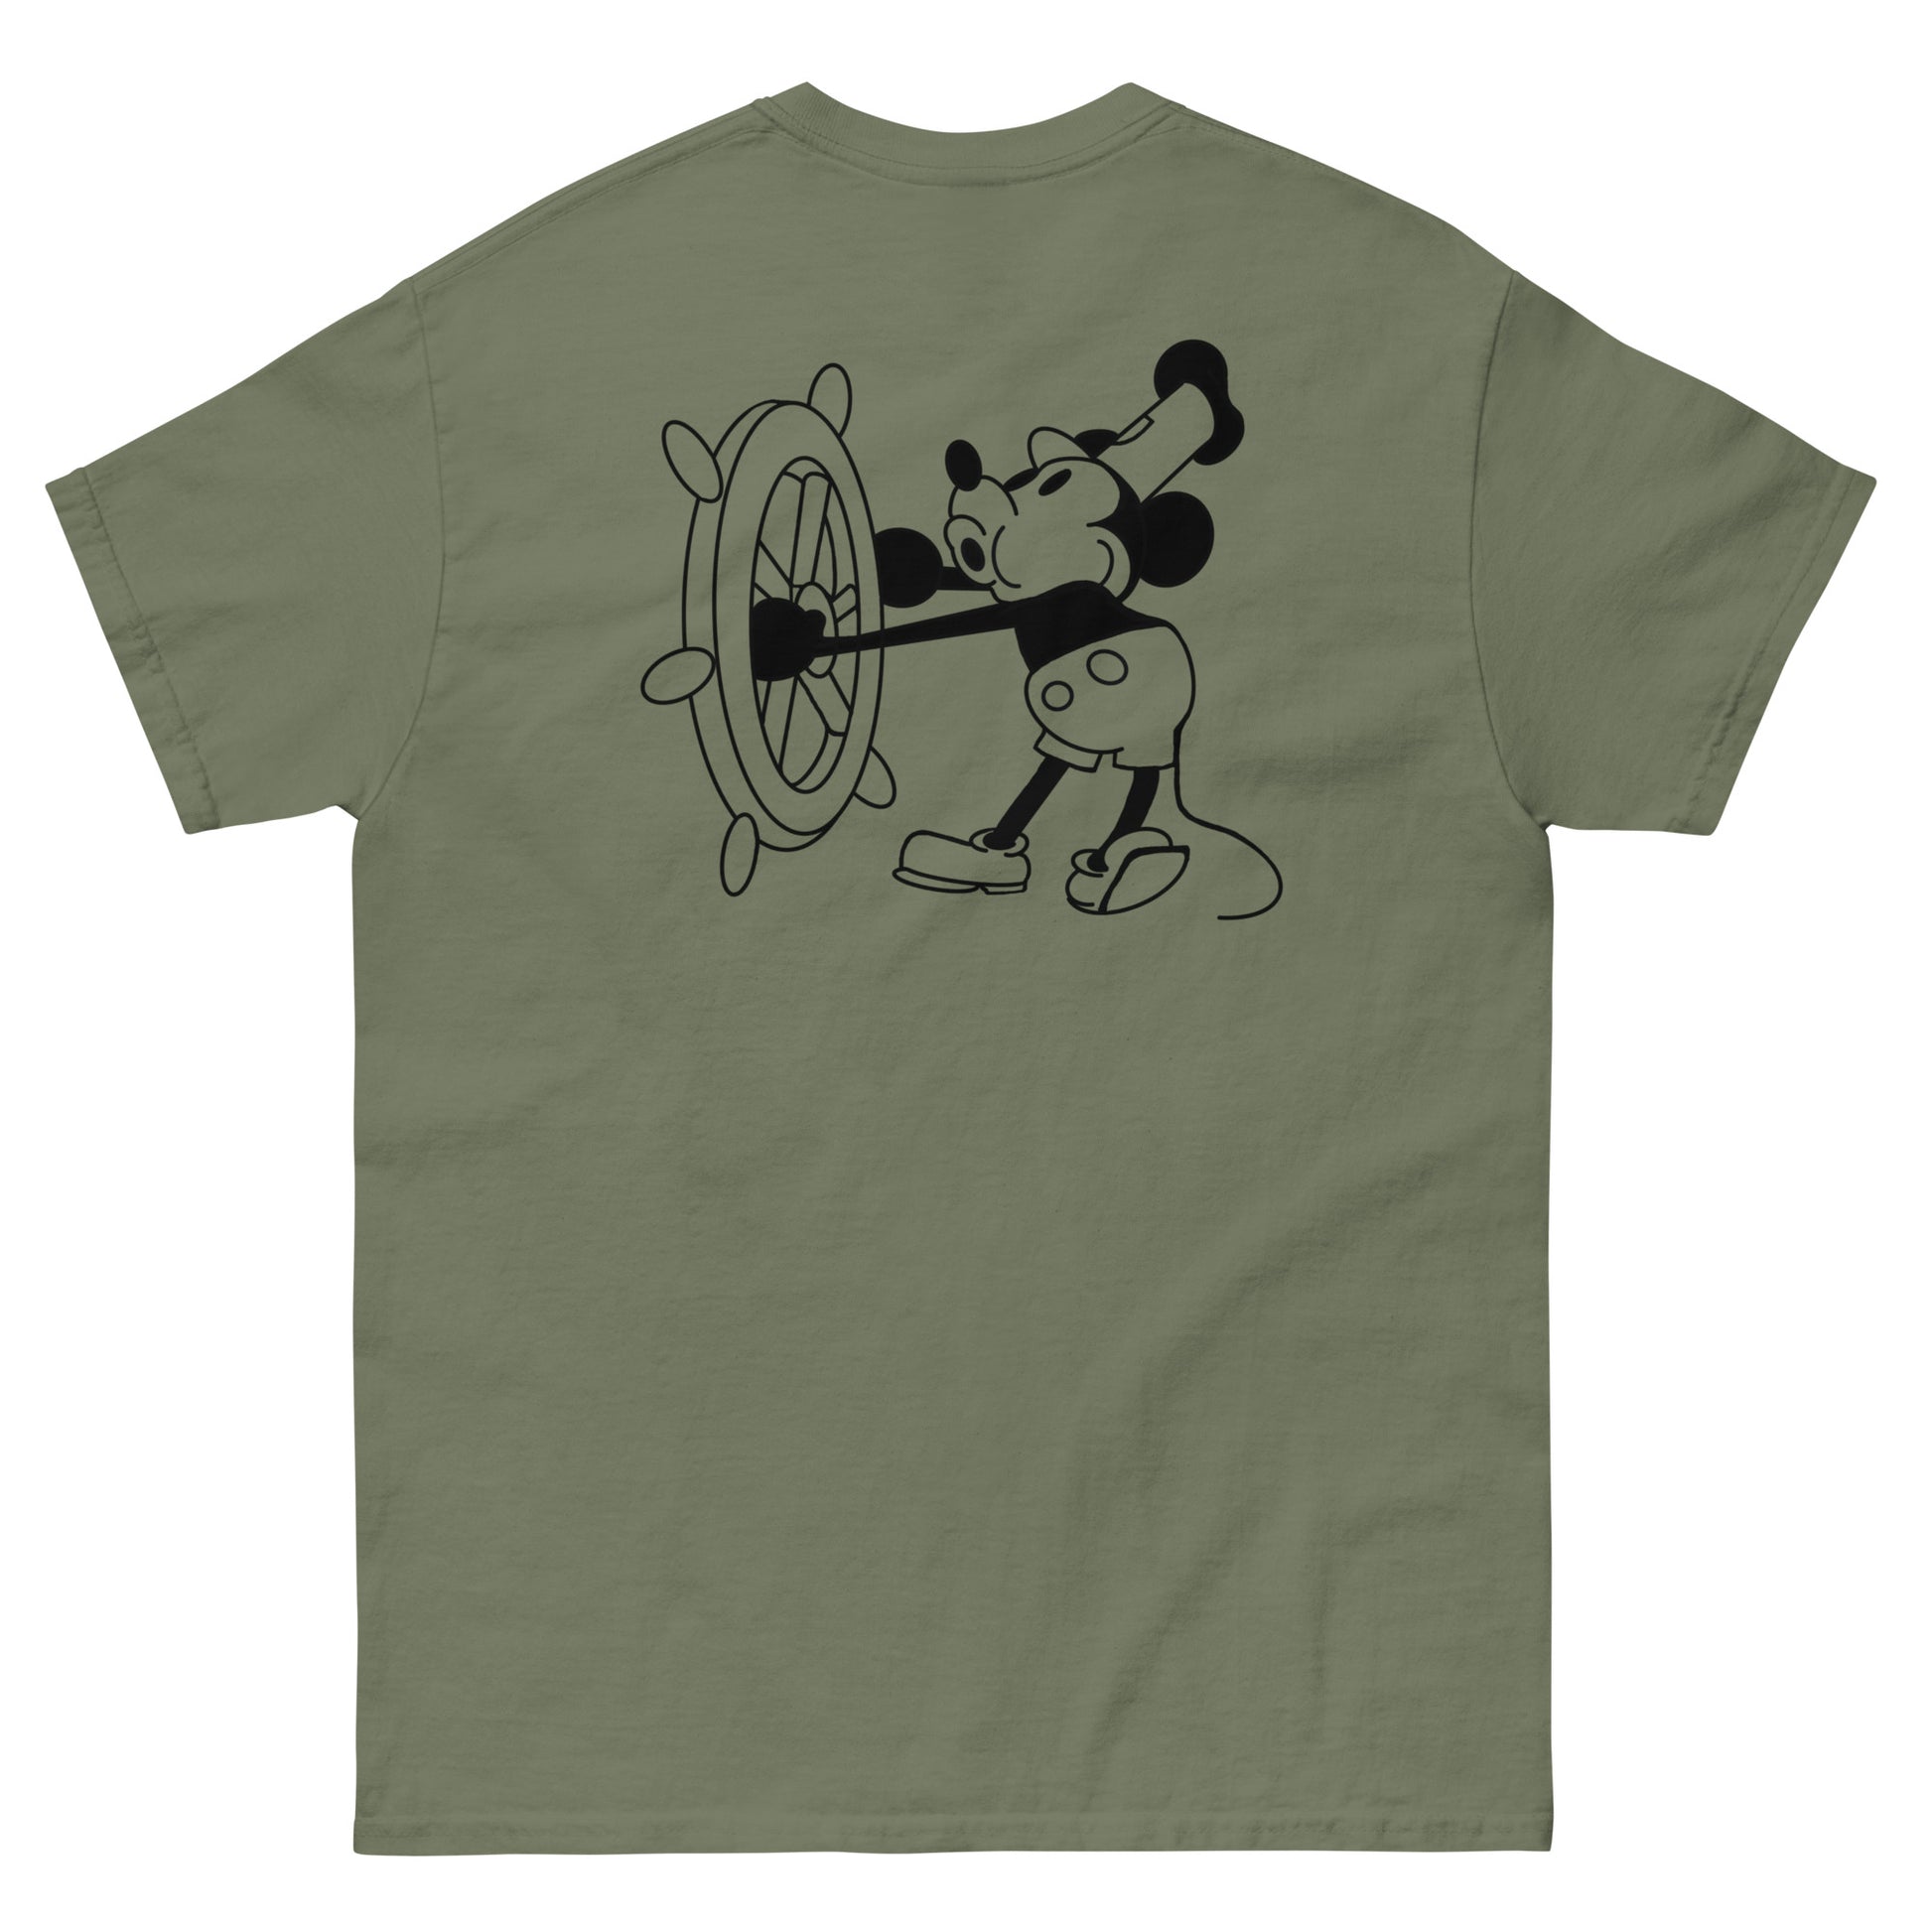 Good Day Steamboat Gildan classic tee - Ghostly Tails